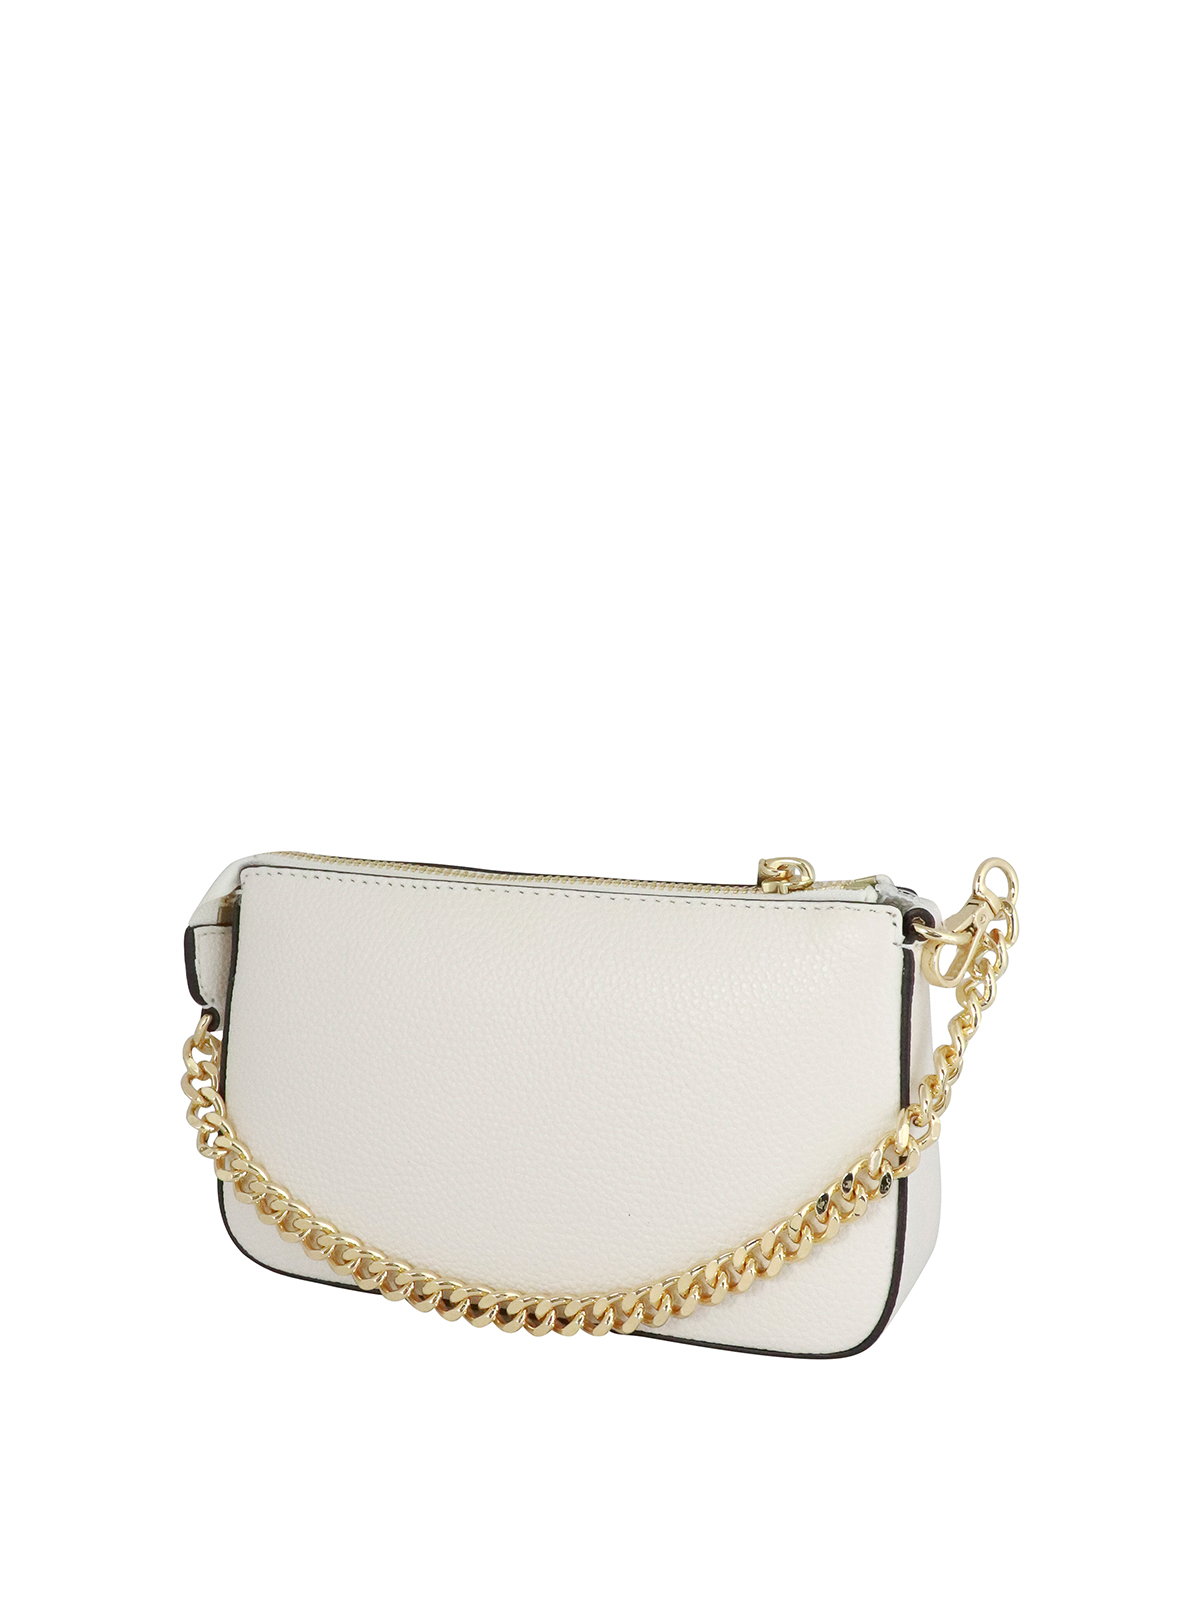 Michael Michael Kors chain clutch in hammered leather